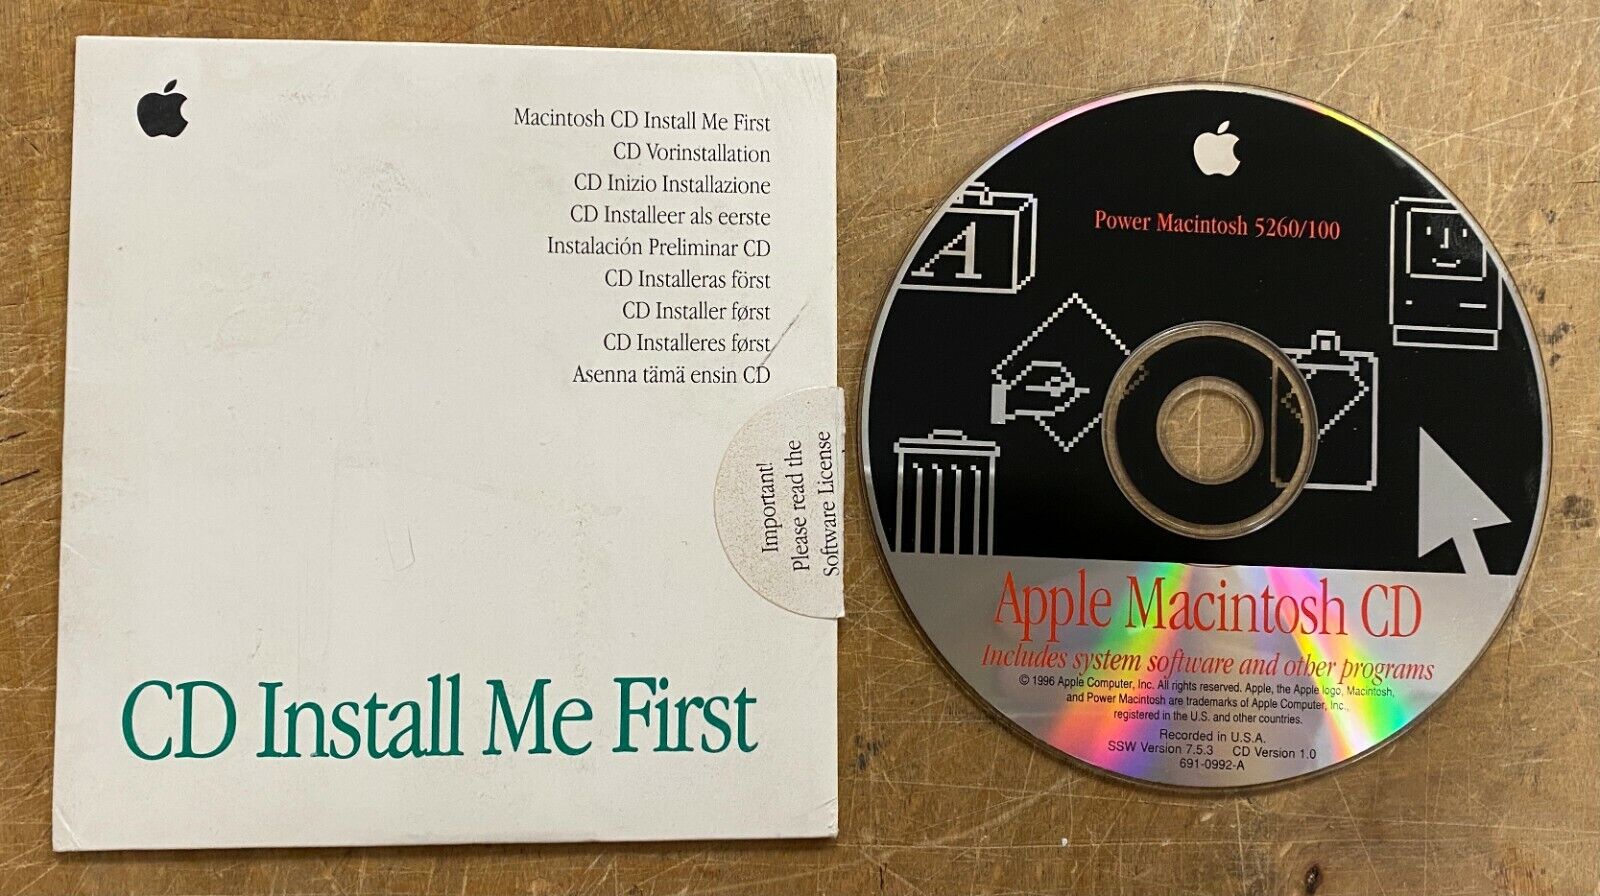 Apple Power Macintosh 5260/100 Software (7.5.3) and Programs CD P/N: 691-0992-A